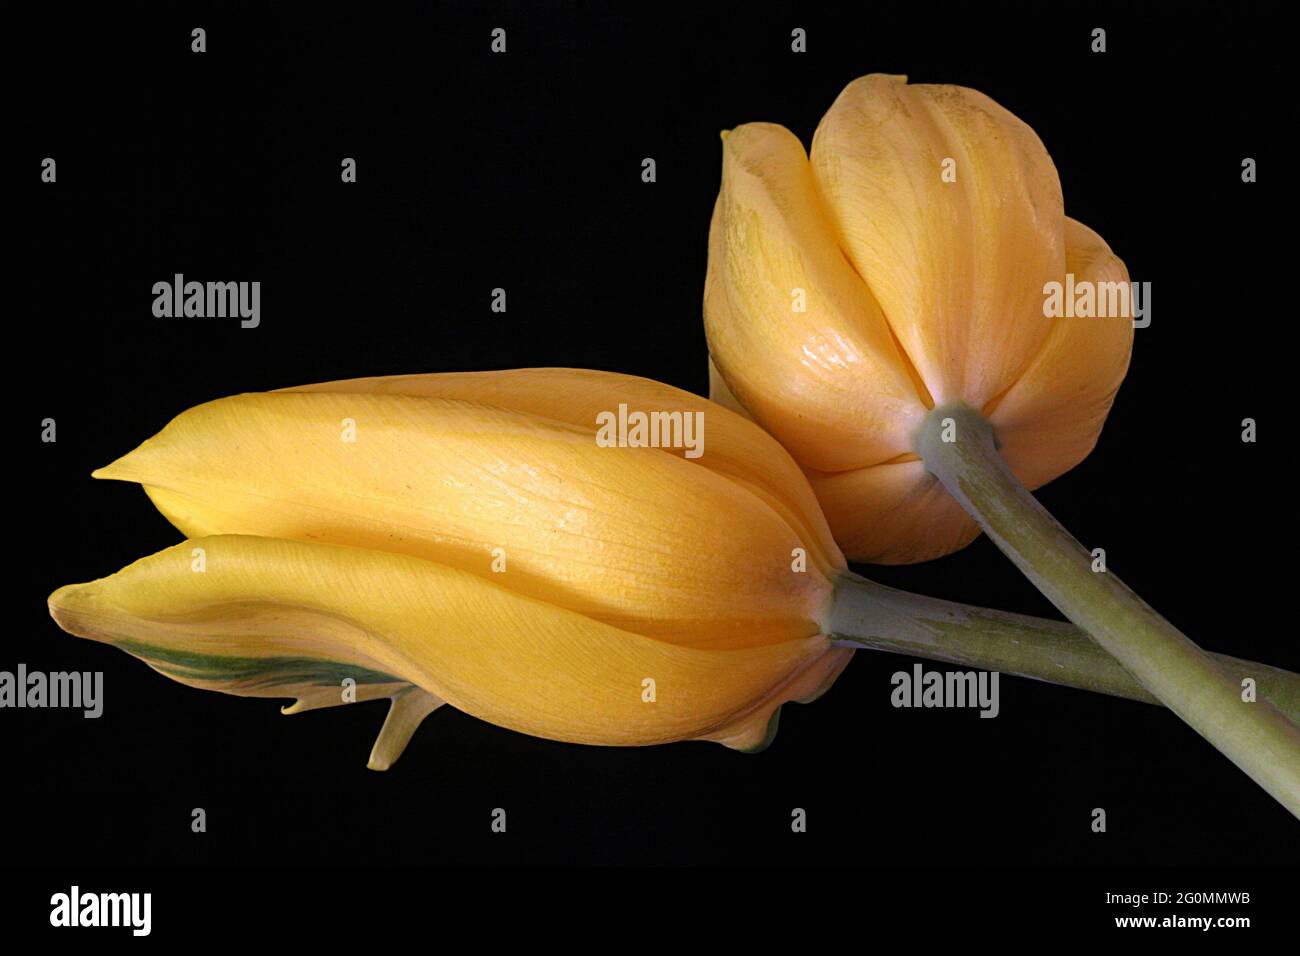 A studio image of two Triumph Strong Gold yellow tulips with stems intertwined against a black background.  Studio image. Stock Photo